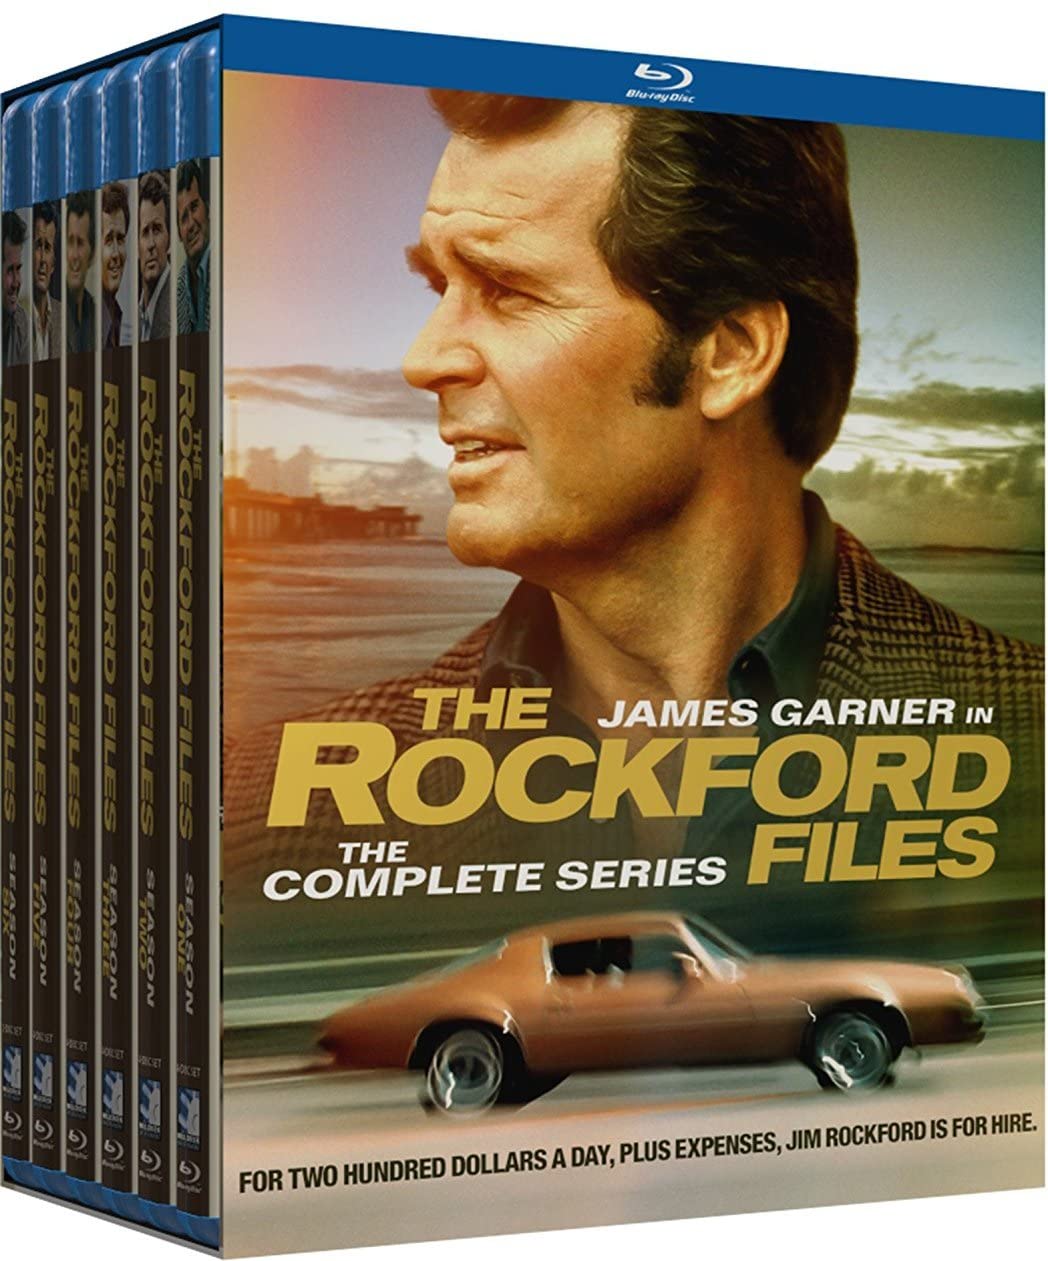 Rockford Files, The – The Complete Series – Blu-ray on MovieShack